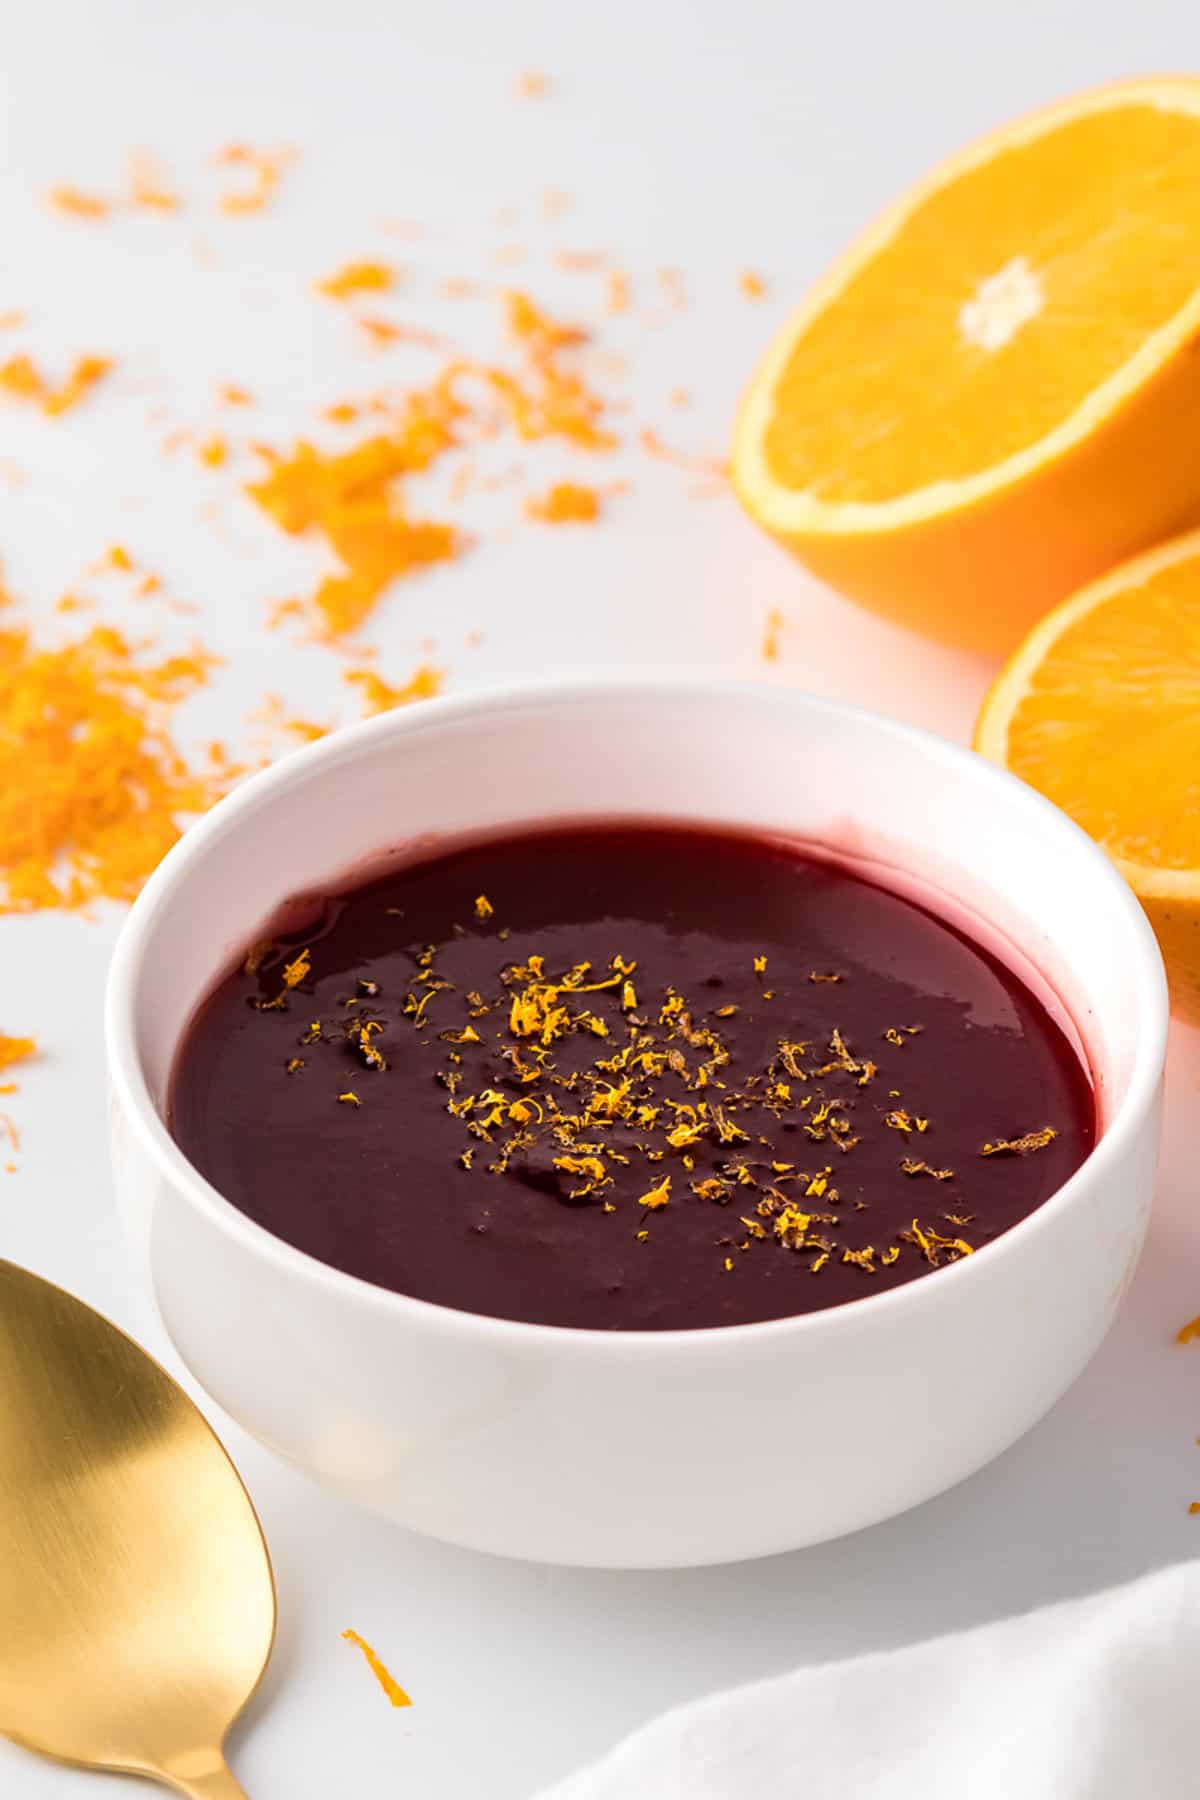 Close up view of cranberry sauce in white bowl, with oranges in the background.